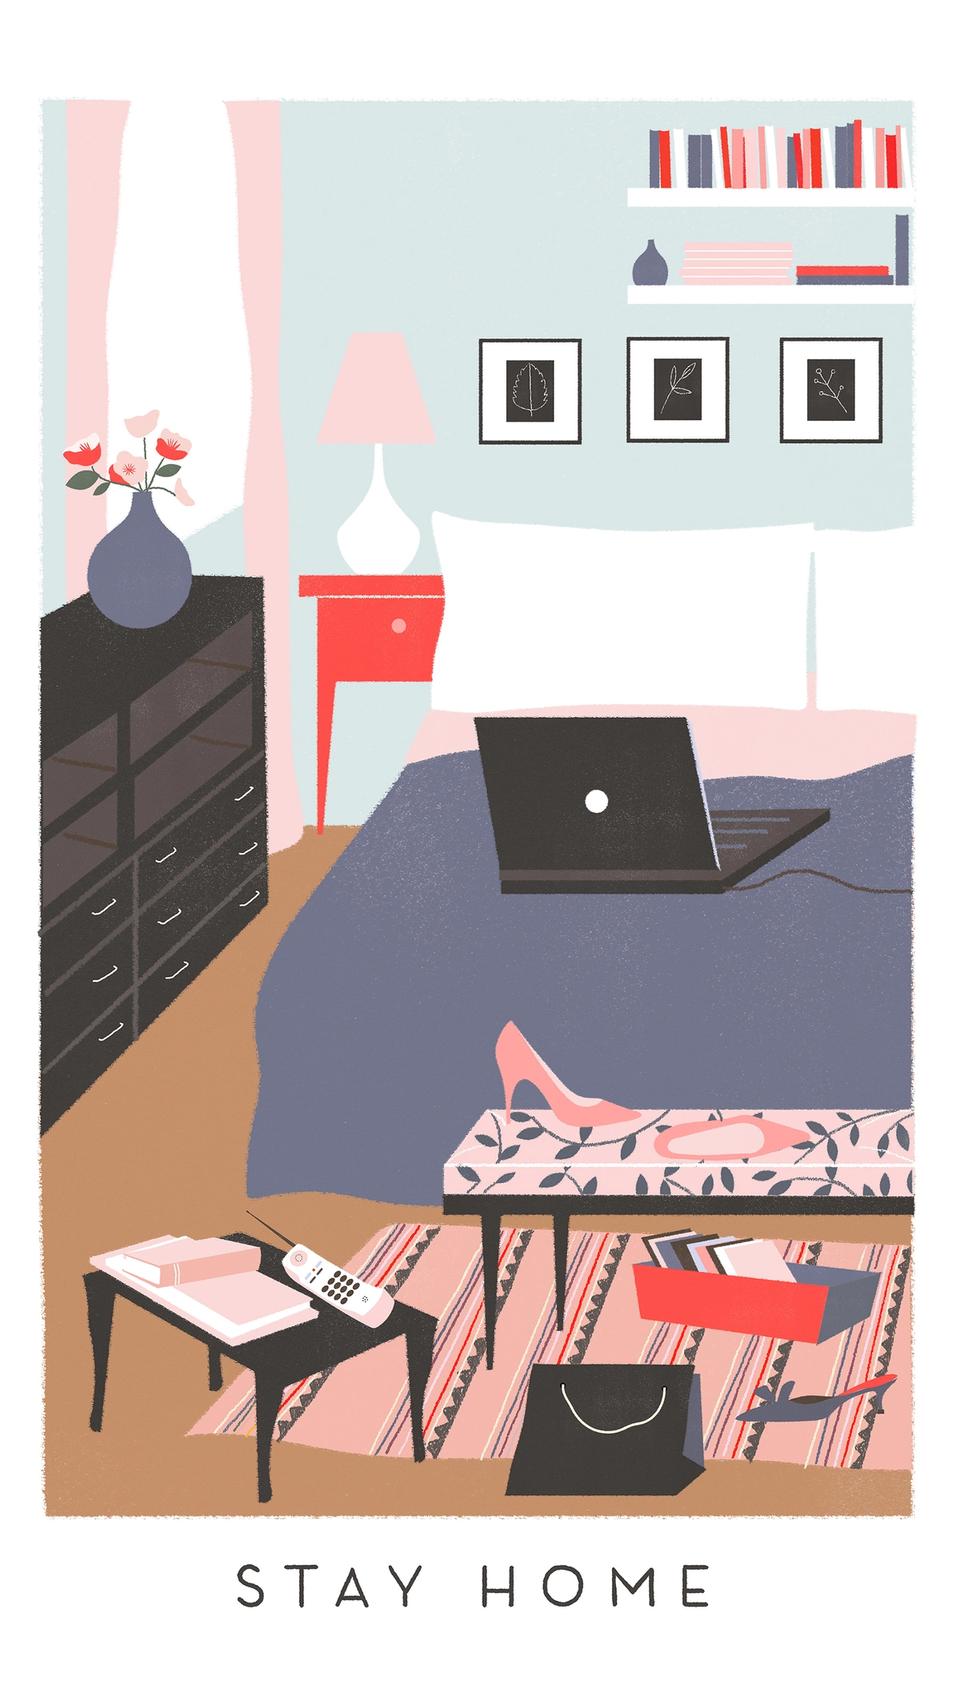 Illustration of Carrie Bradshaw New York apartment interior, from TV show Sex and the City